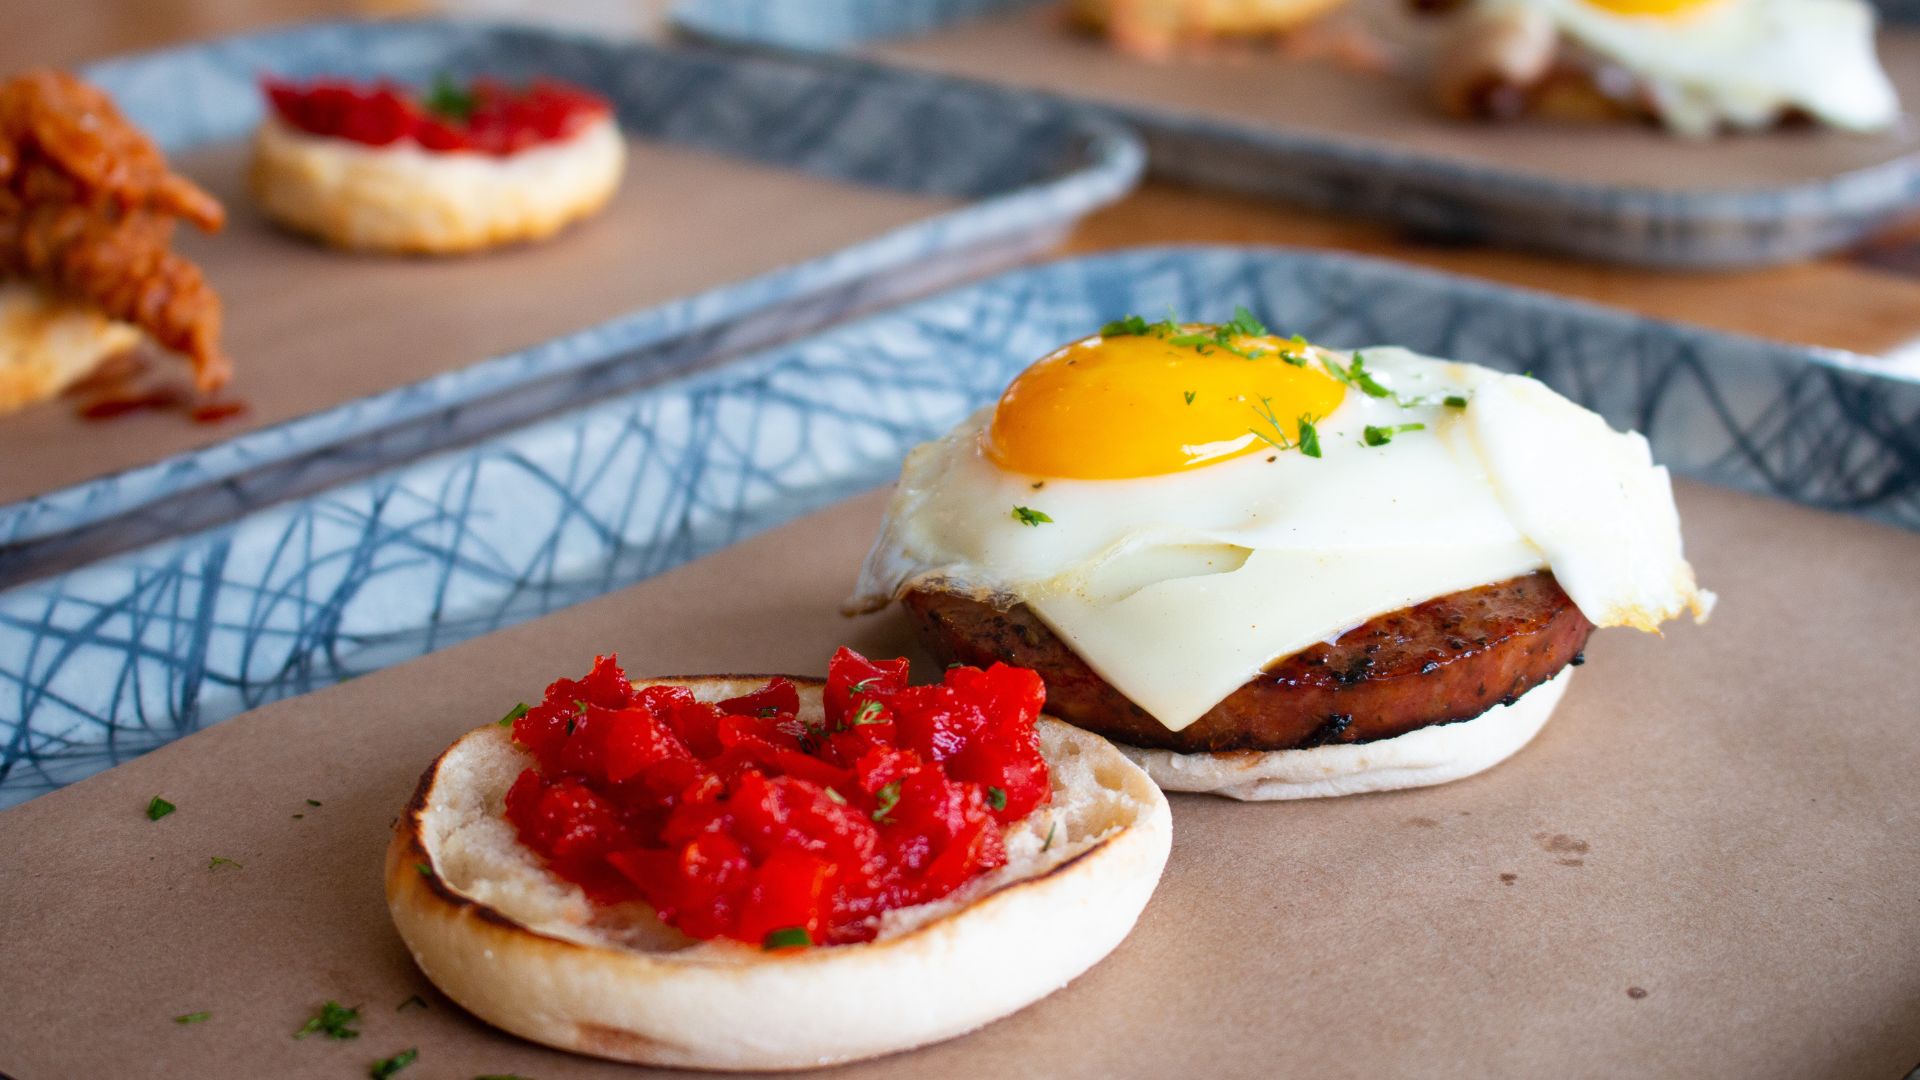 During brunch in St. Louis, you can enjoy an egg Rick muffin at Grace Meat and Three.